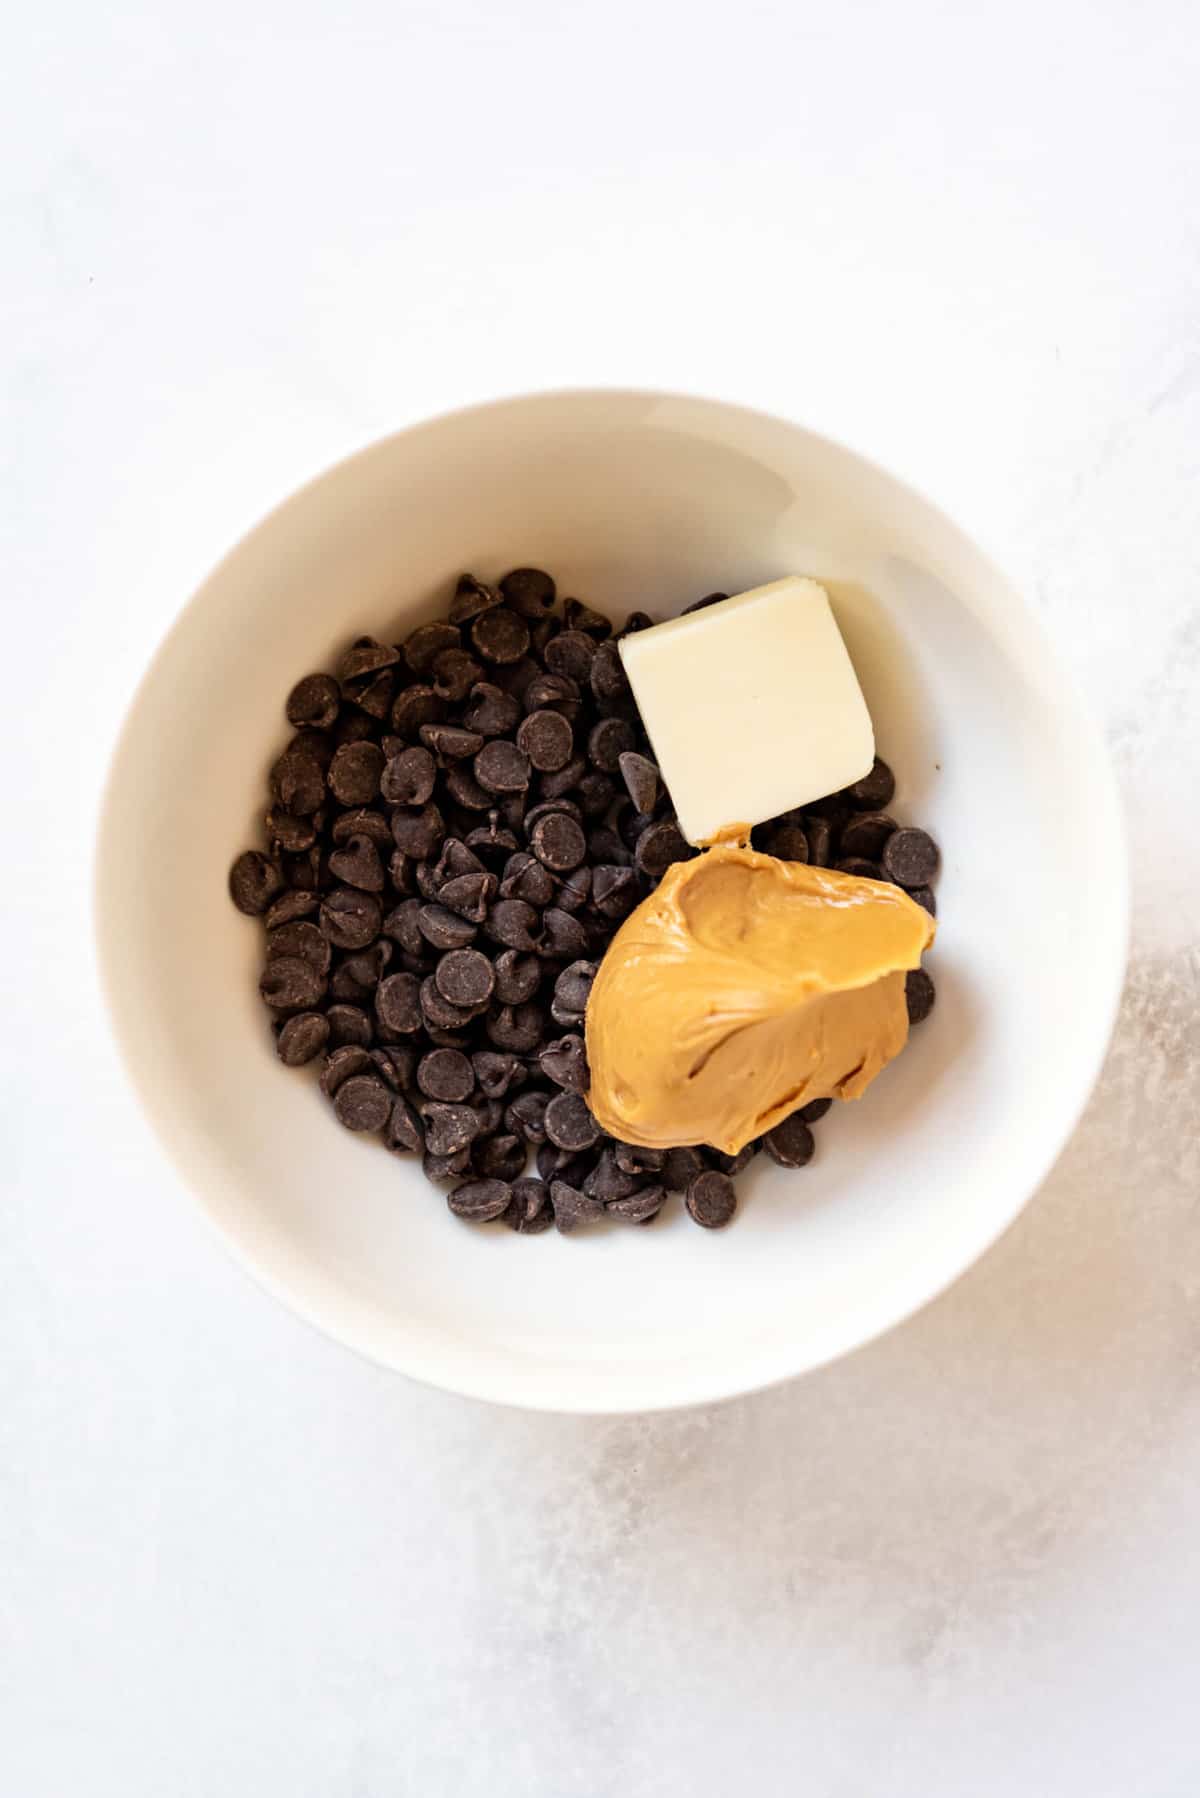 An image of chocolate, butter, and peanut butter ready to be melted in a bowl.